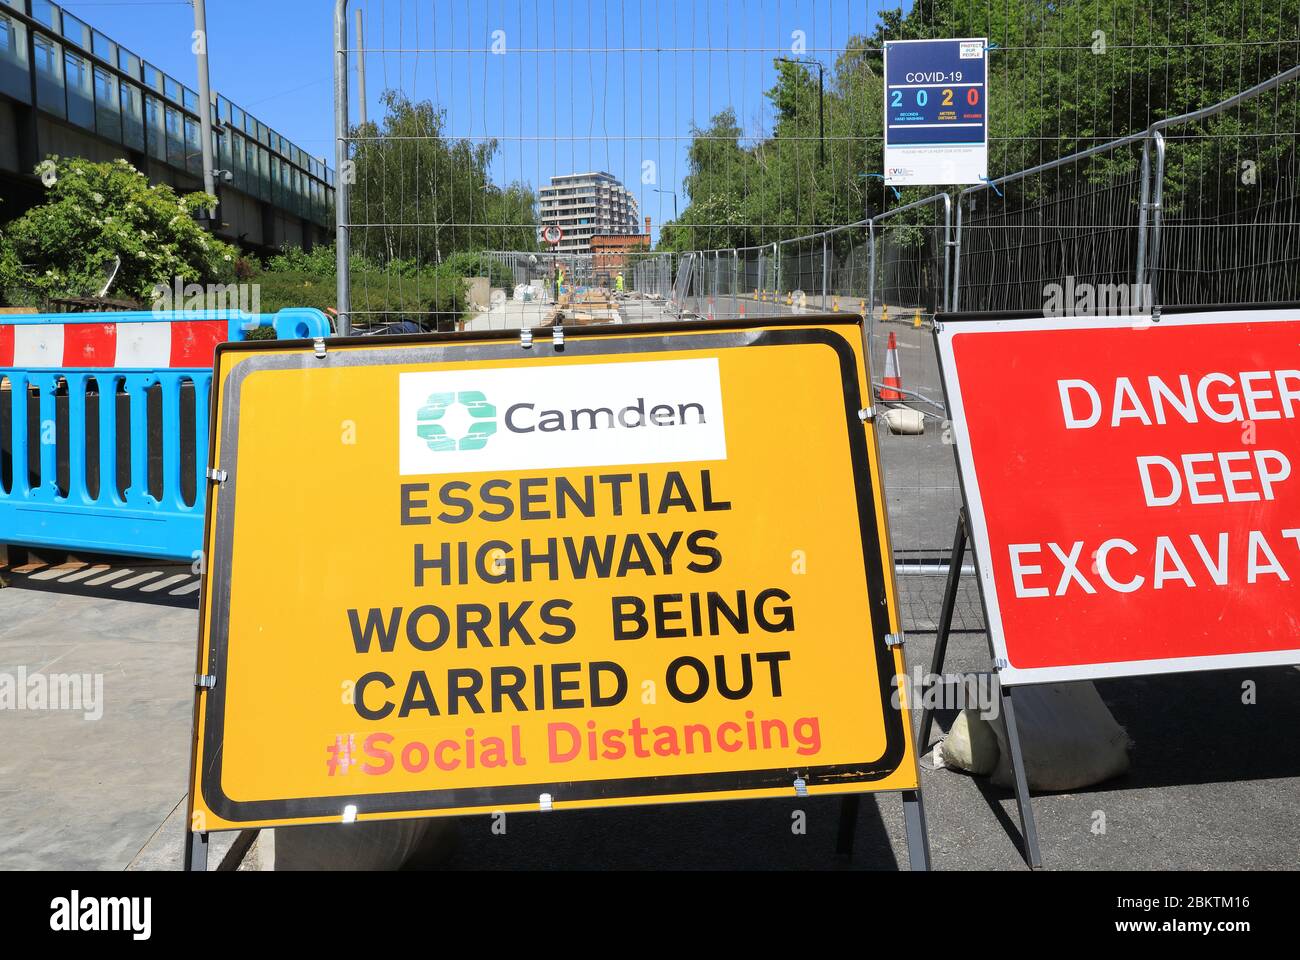 Social distancing in Camden Council essential road works, in the coronavirus pandemic, in London, UK Stock Photo